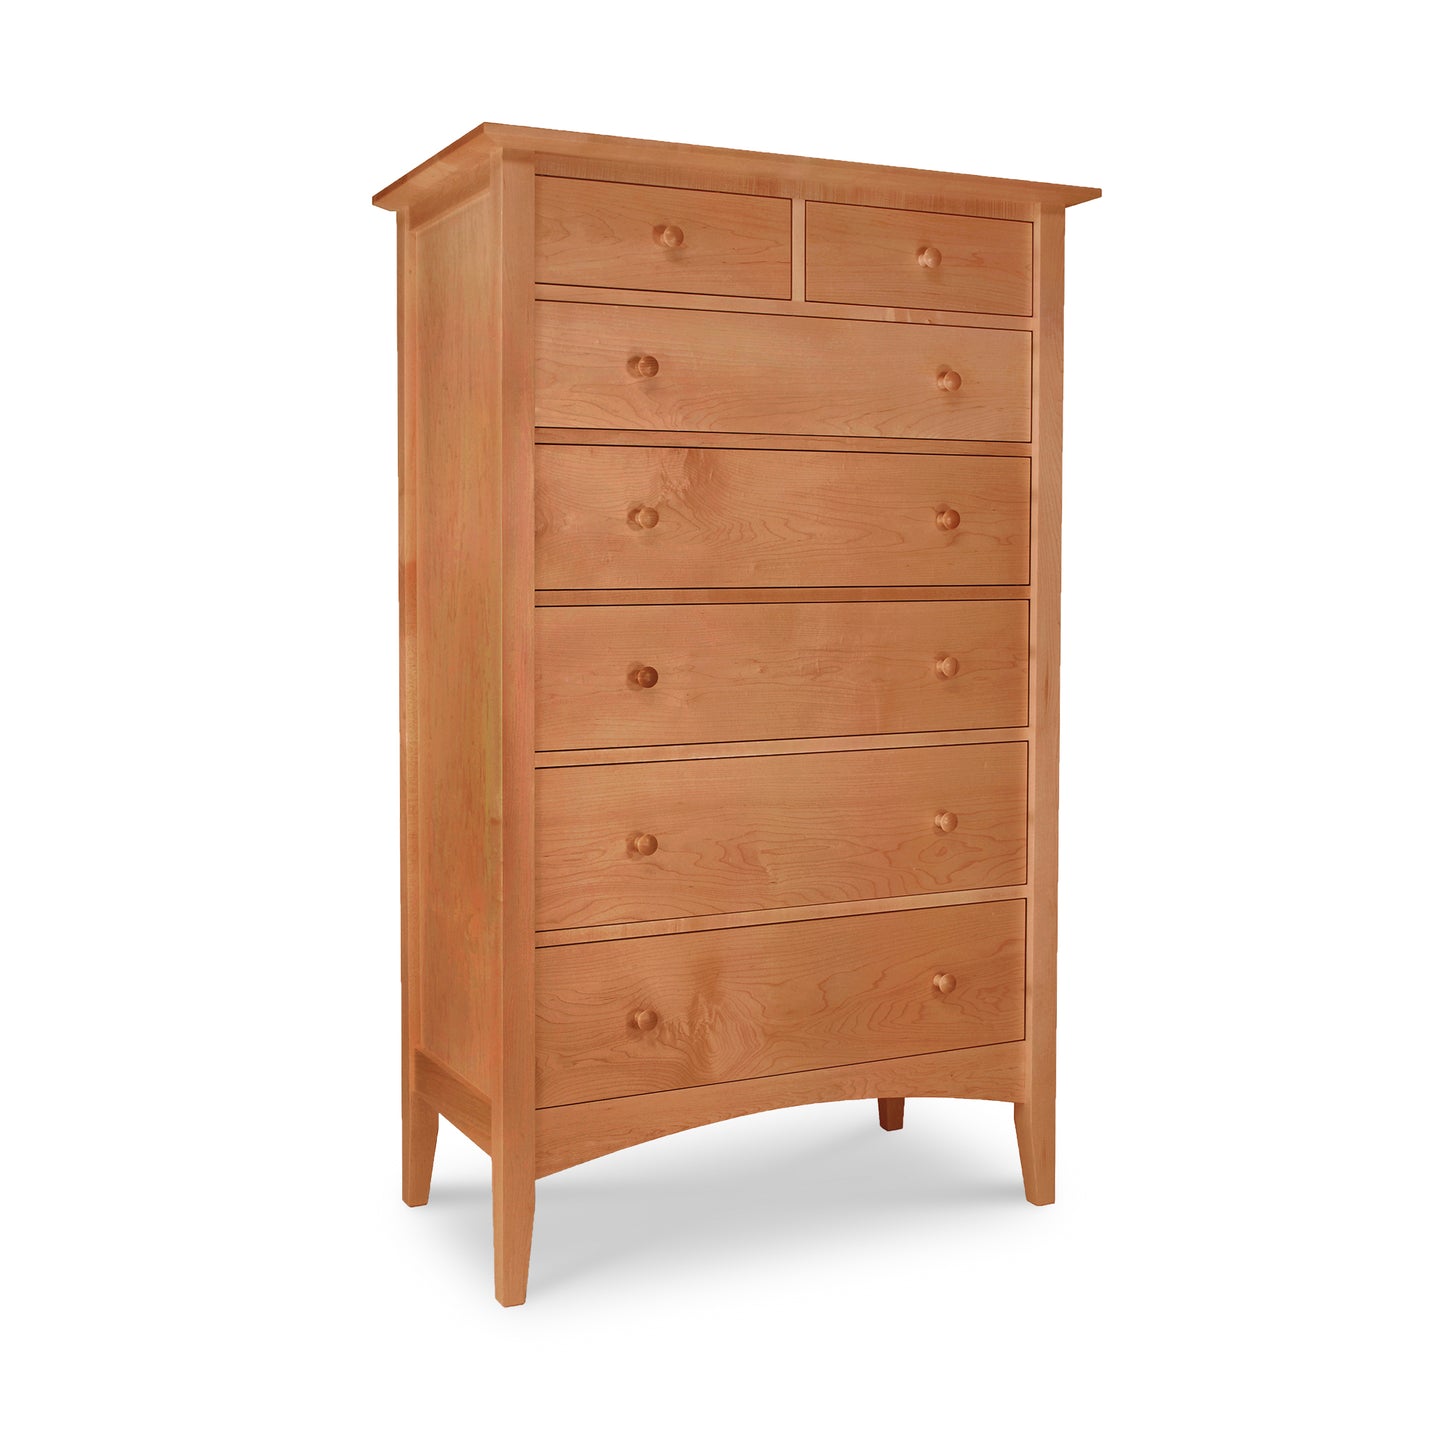 A tall wooden dresser from the Maple Corner Woodworks American Shaker Furniture Collection with seven drawers, featuring a light natural finish and simple, elegant hardware. The dresser stands upright on four slender legs against a white background.